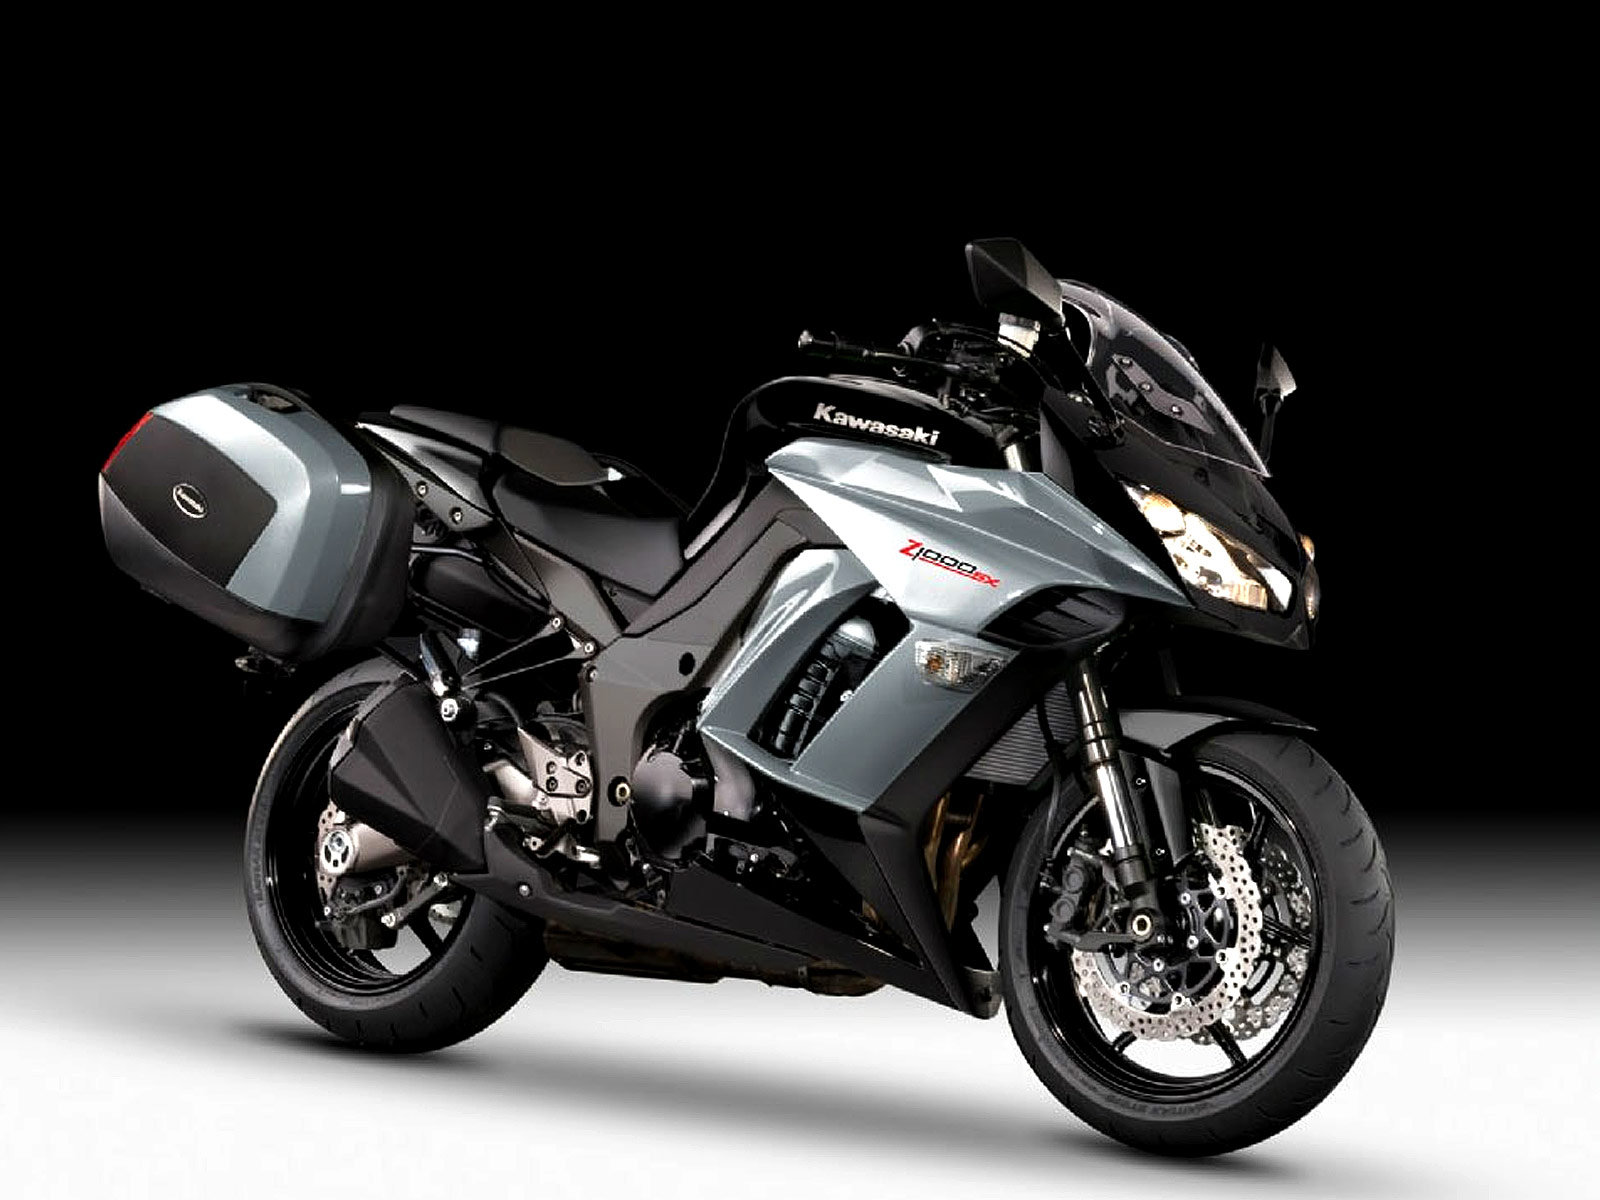 servitrice Blitz mareridt Motorcycle photos, specifications review, insurance, lawyers: 2012 KAWASAKI  Z1000SX Tourer wallpaper, review